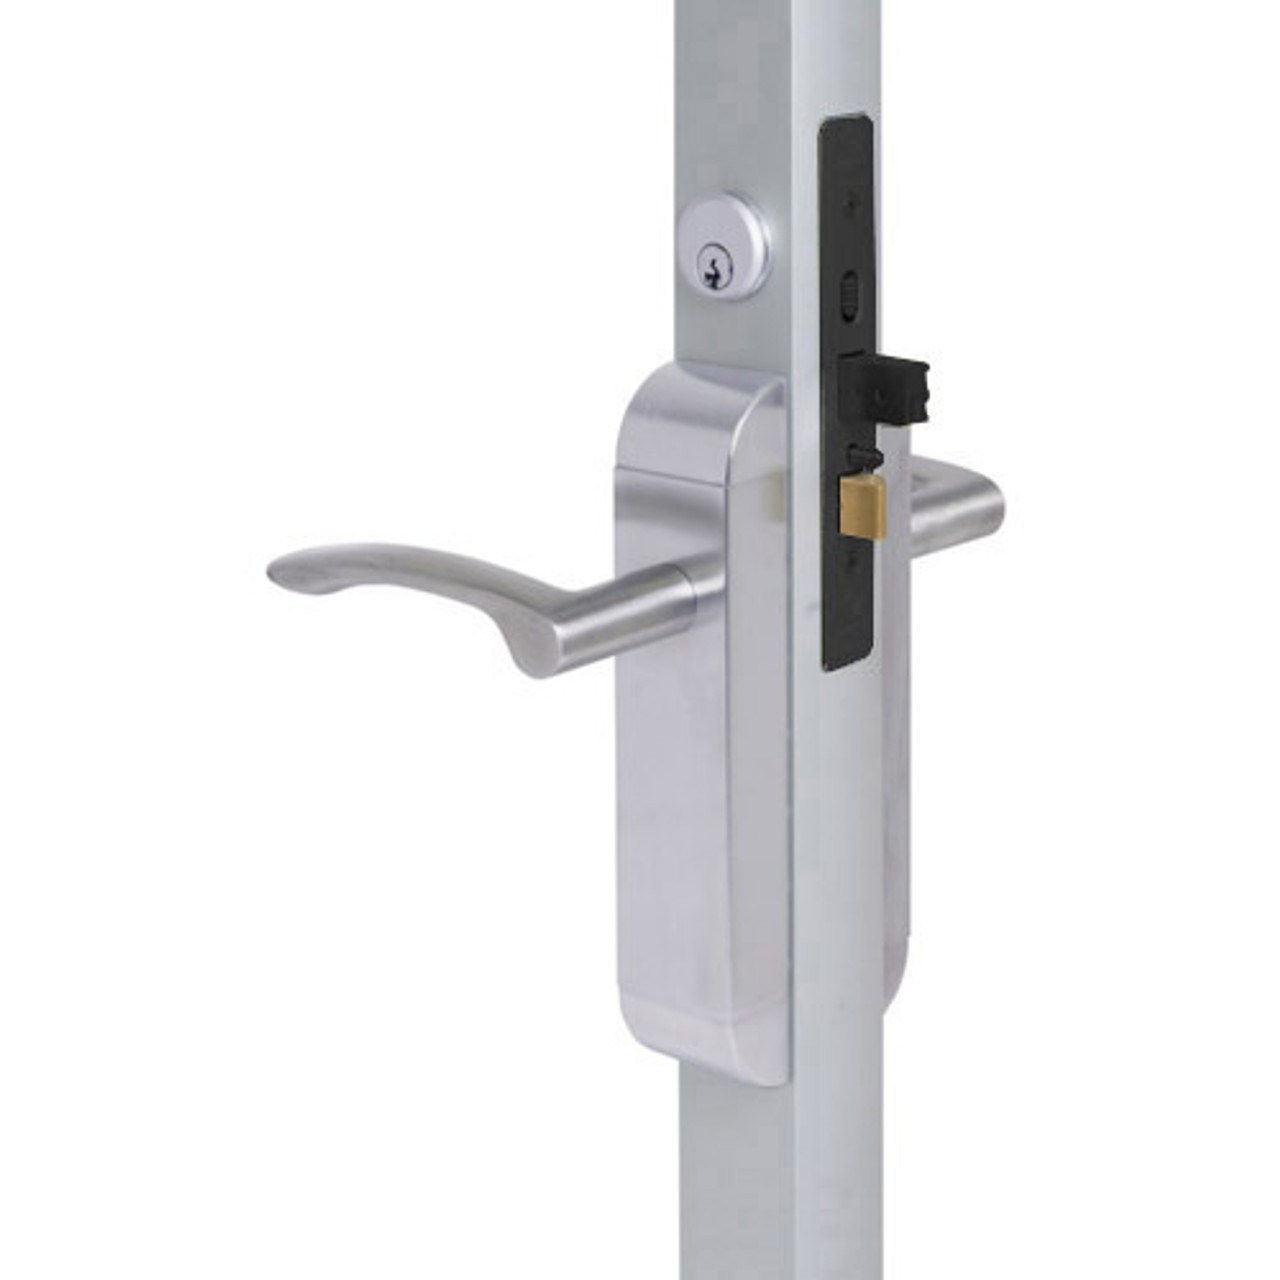 2190-423-201-32 Adams Rite Dual Force Interconnected 2190 series Deadlock/Deadlatch in Bright Stainless